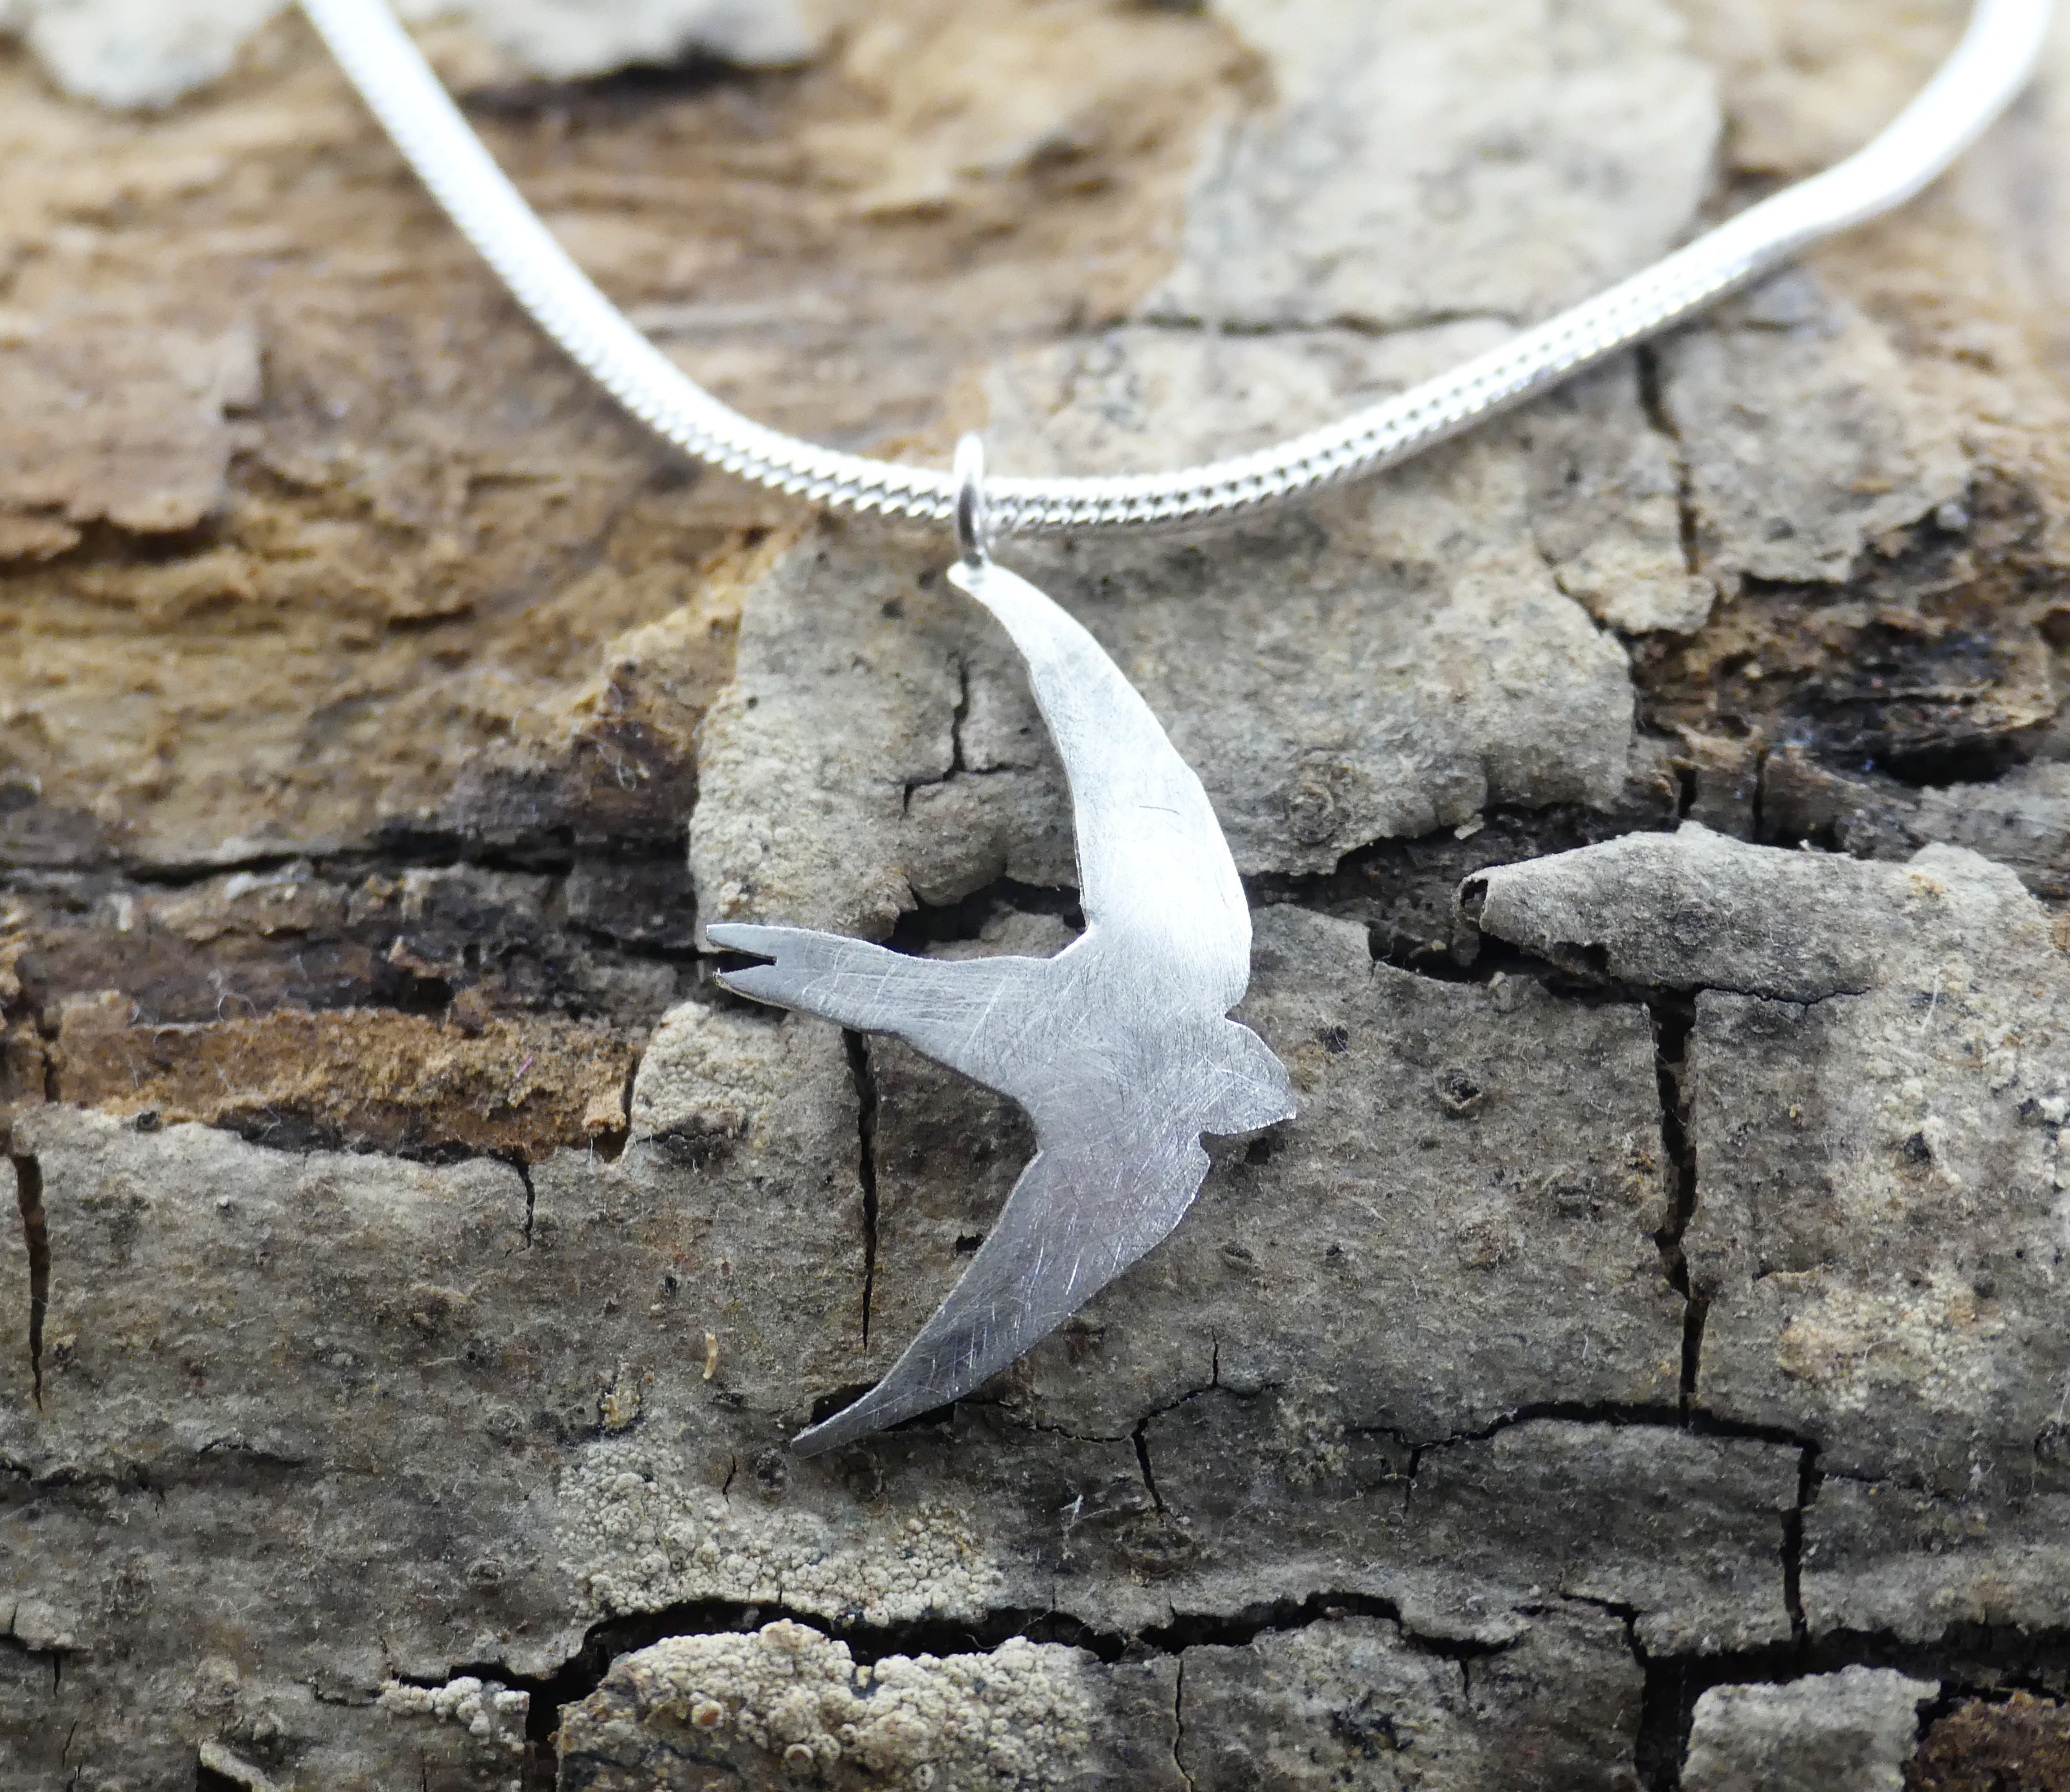 Swift pendant and necklace